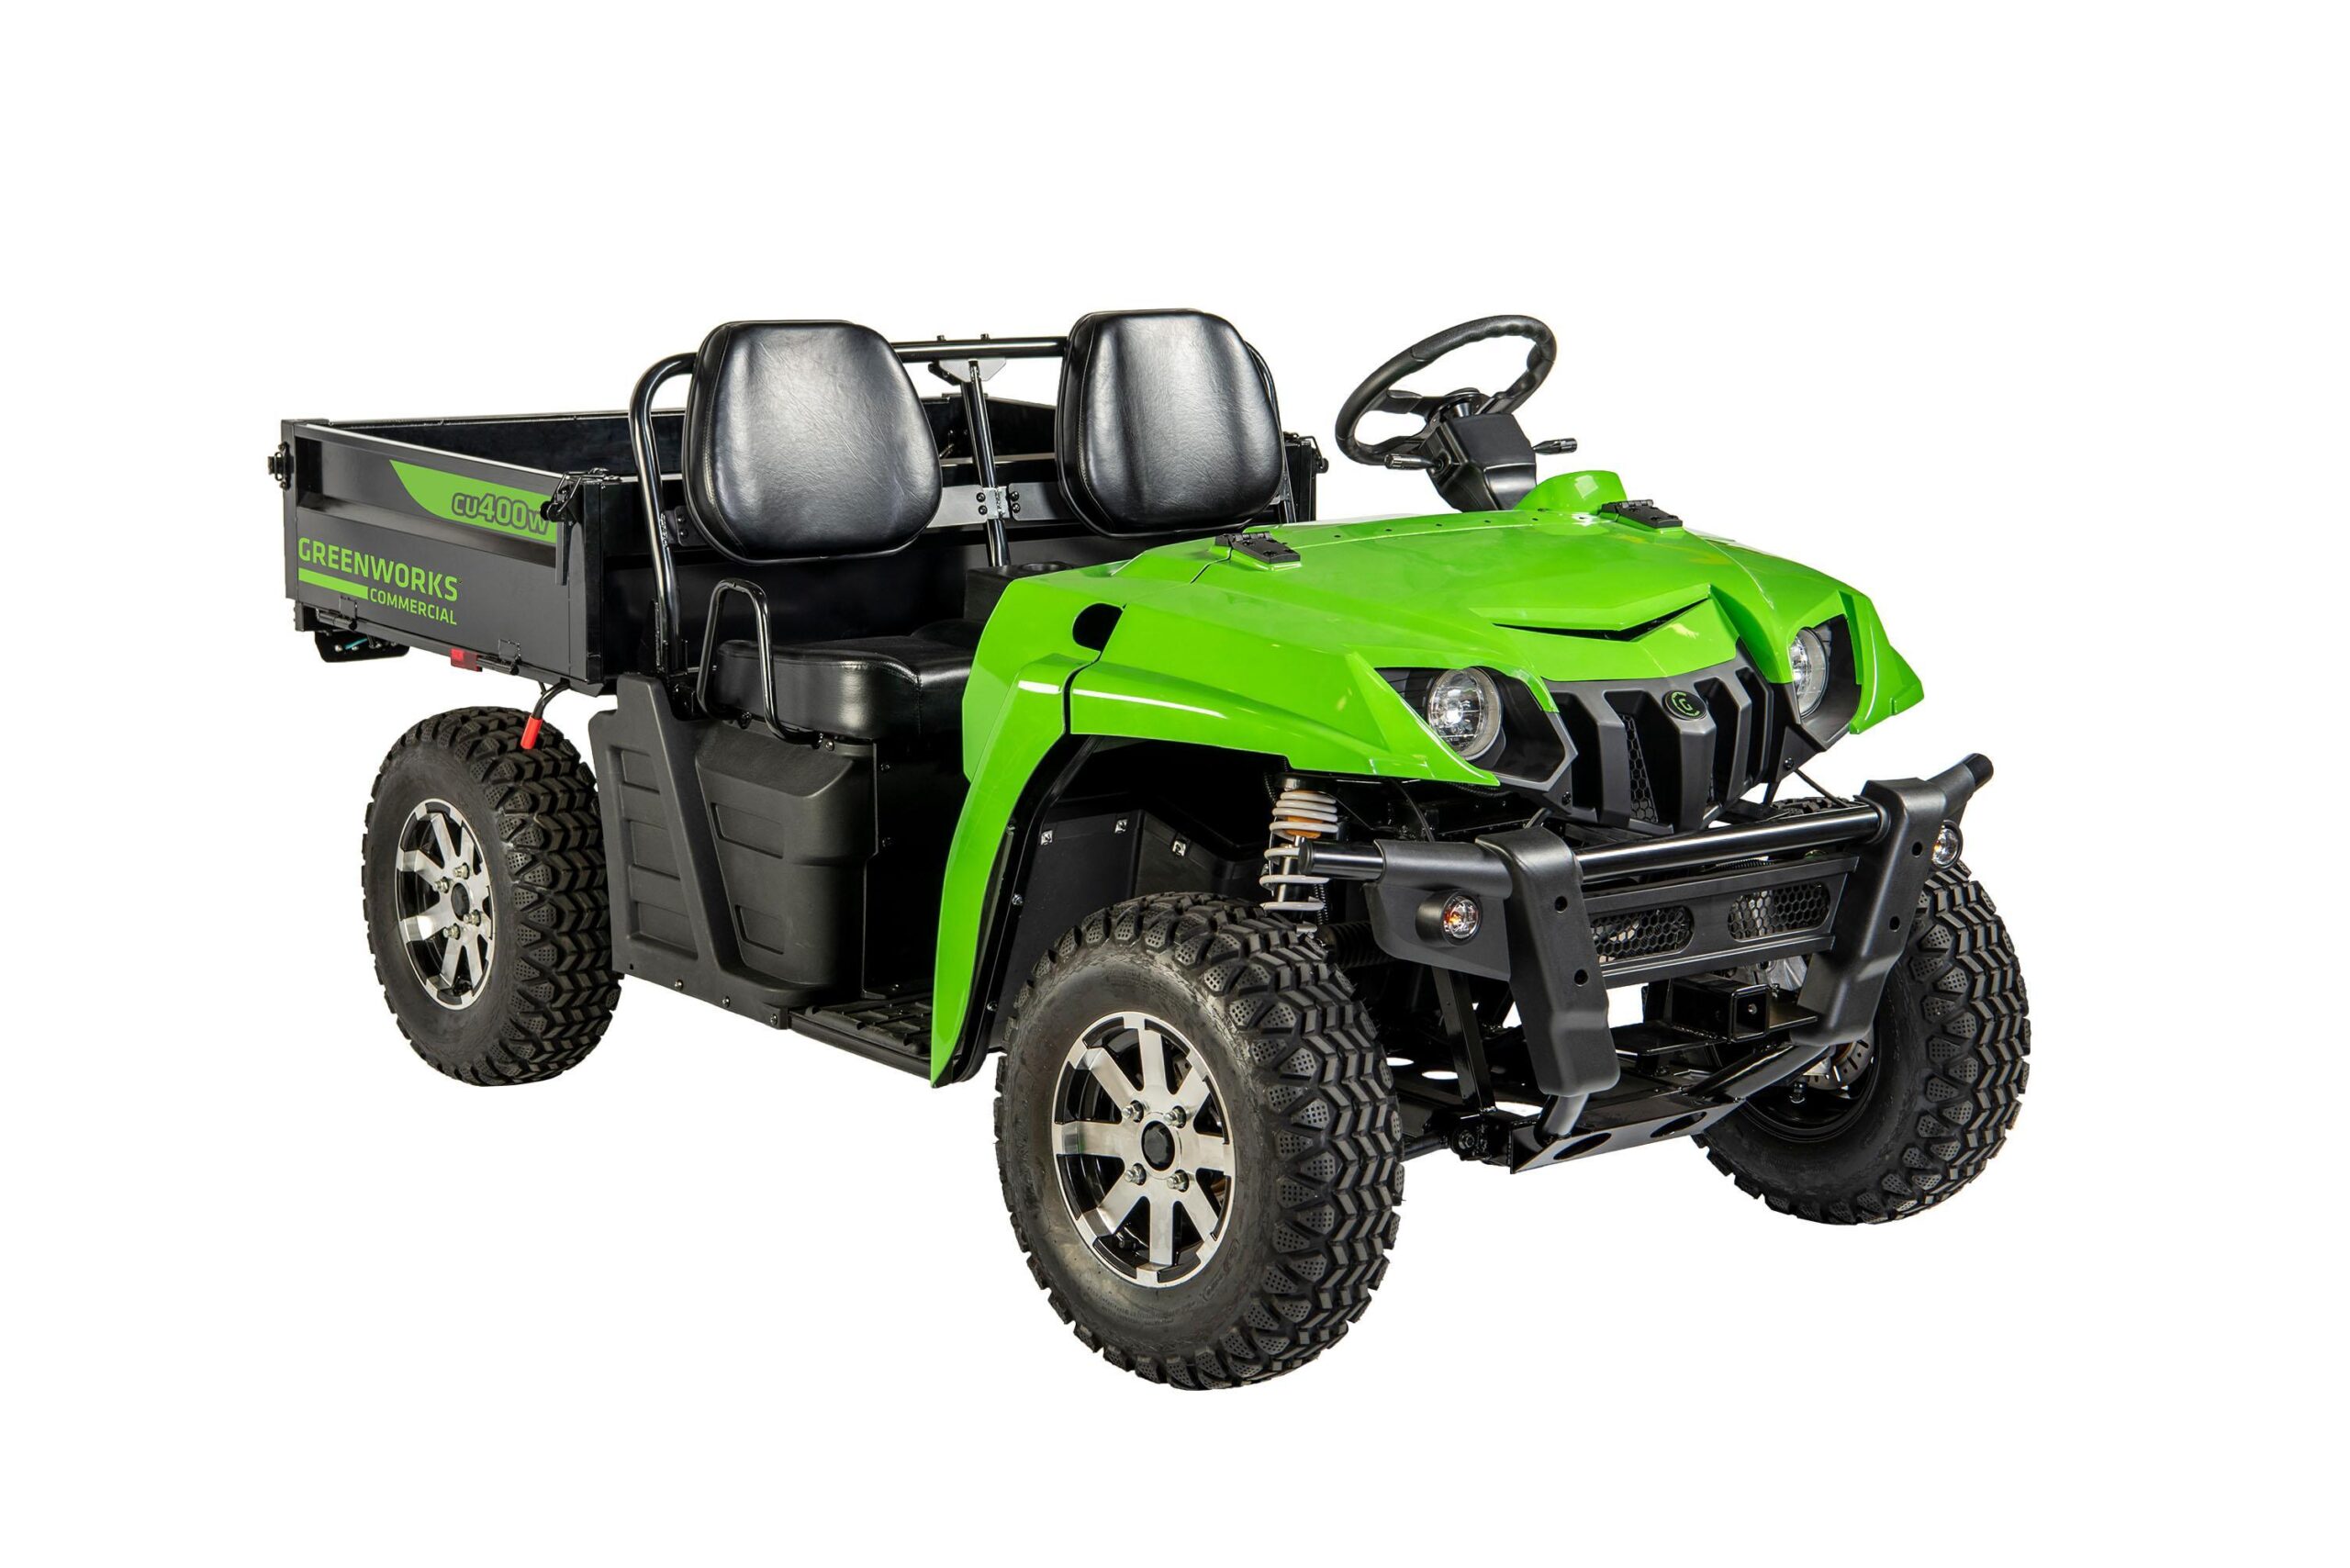 Greenworks Commercial Utility Vehicle